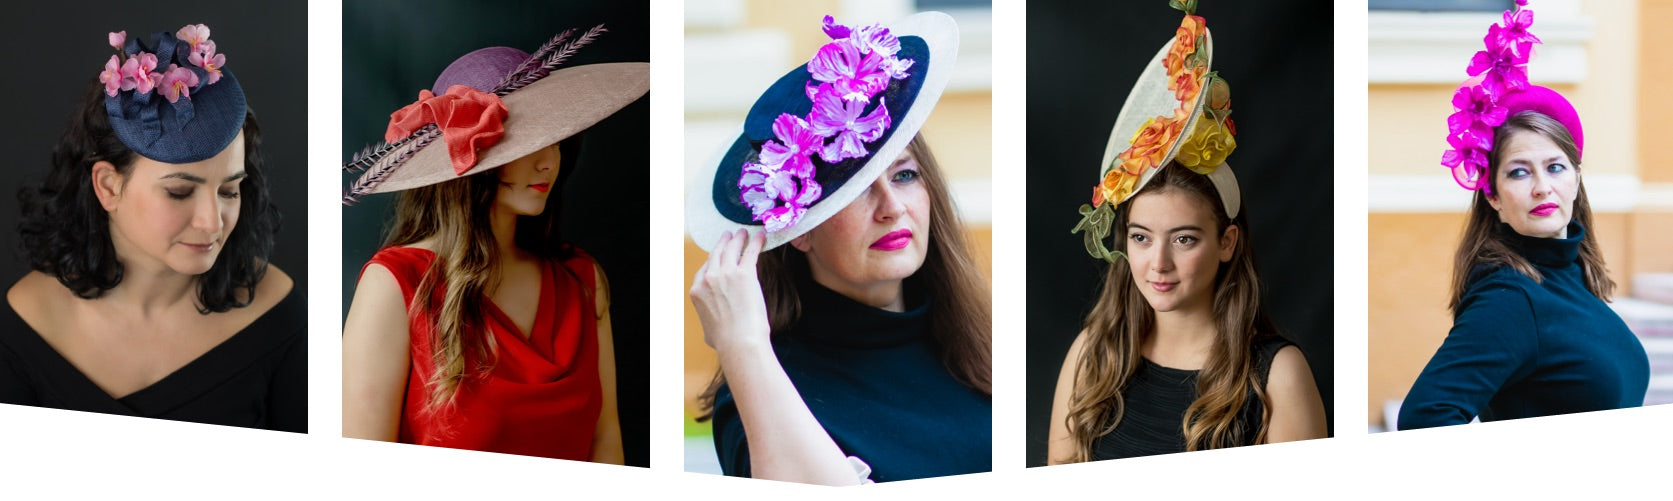 Hats for Ladies Day